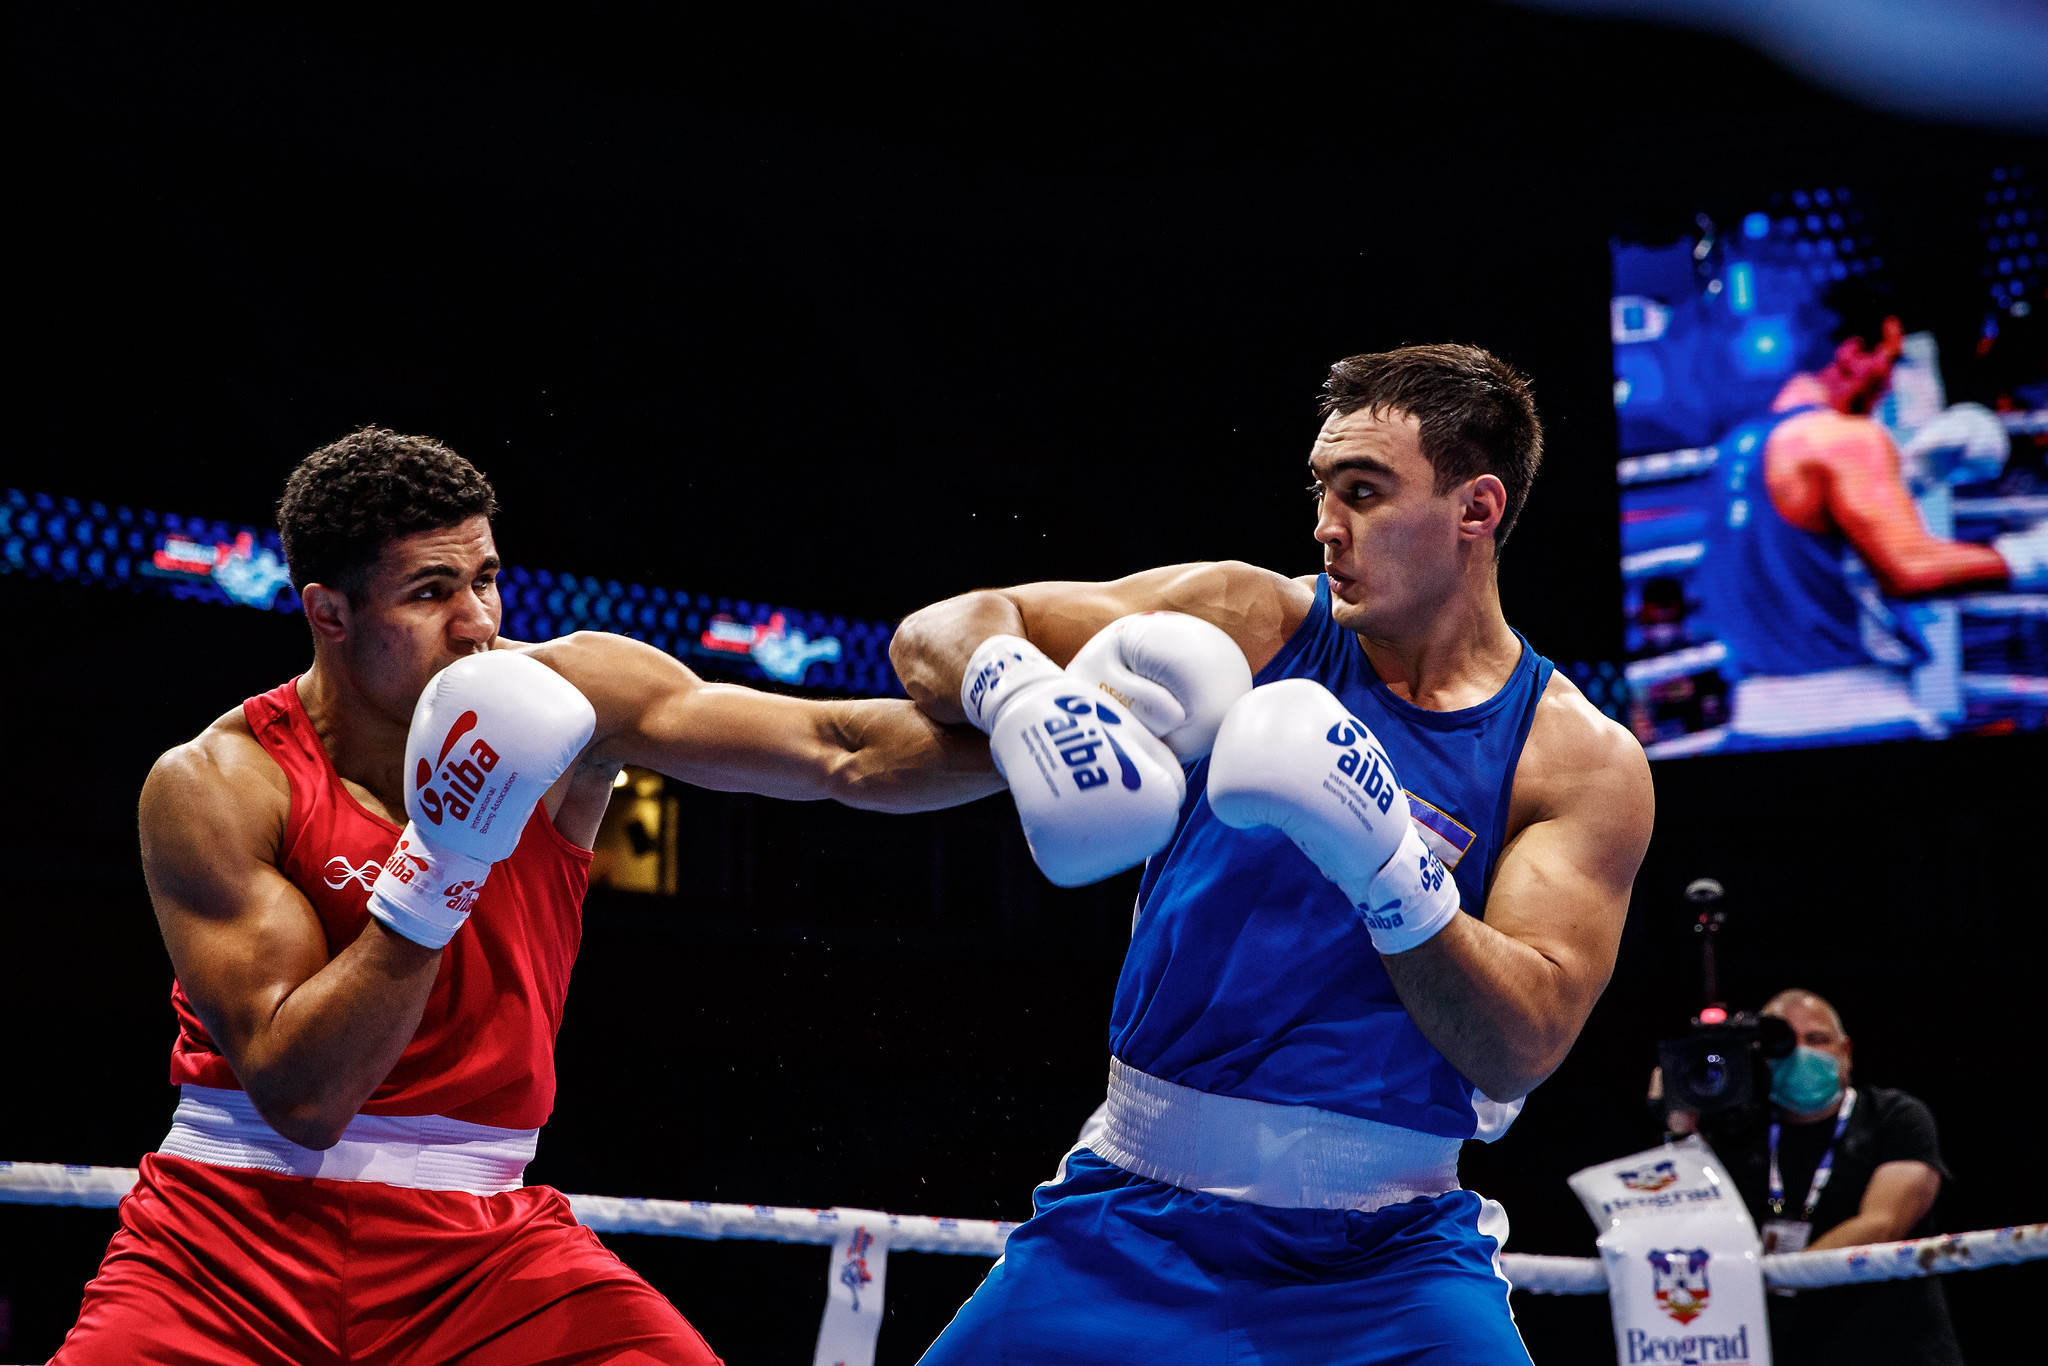 Lazizbek Mullojonov of Uzbekistan came out on top against Delicious Orie of England in the over-92kg round of 16 ©AIBA